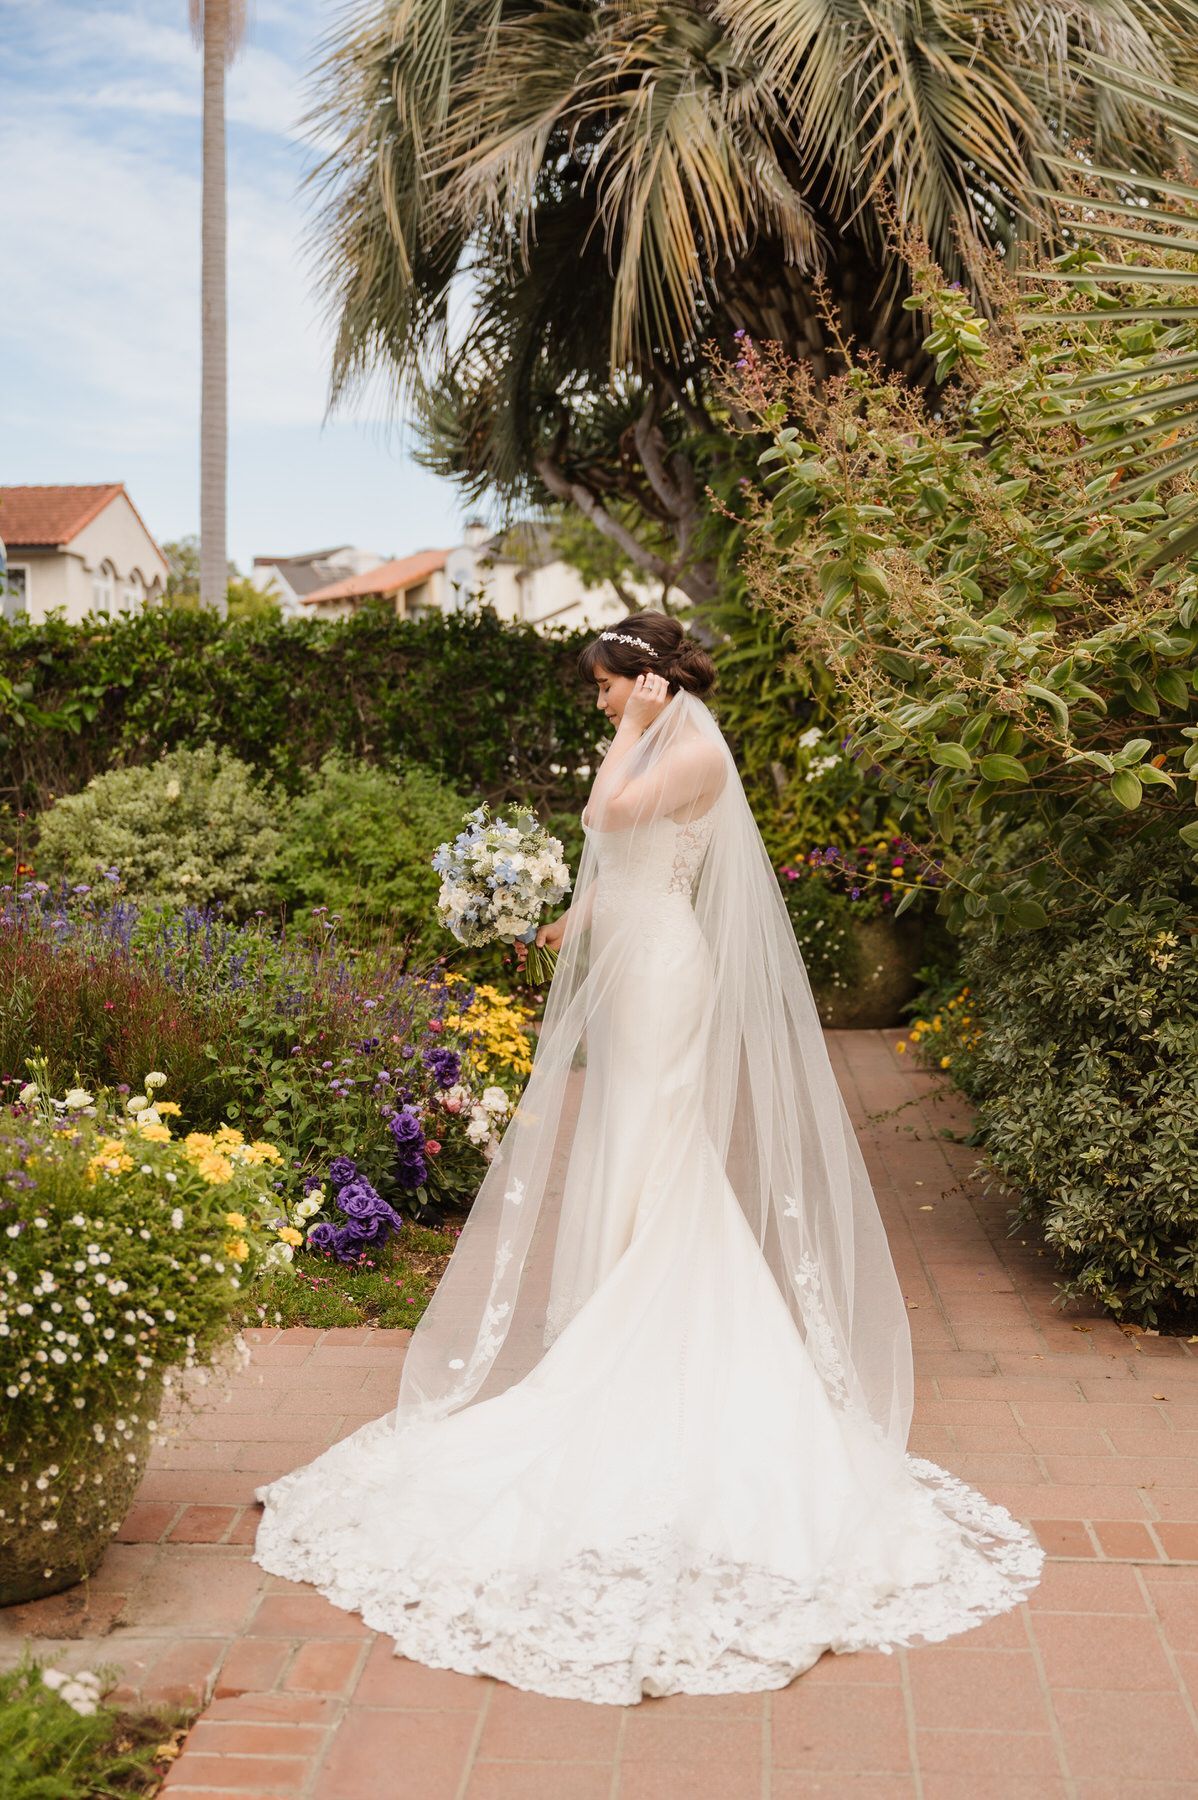 A bride in a wedding dress and veil is standing in a garden.